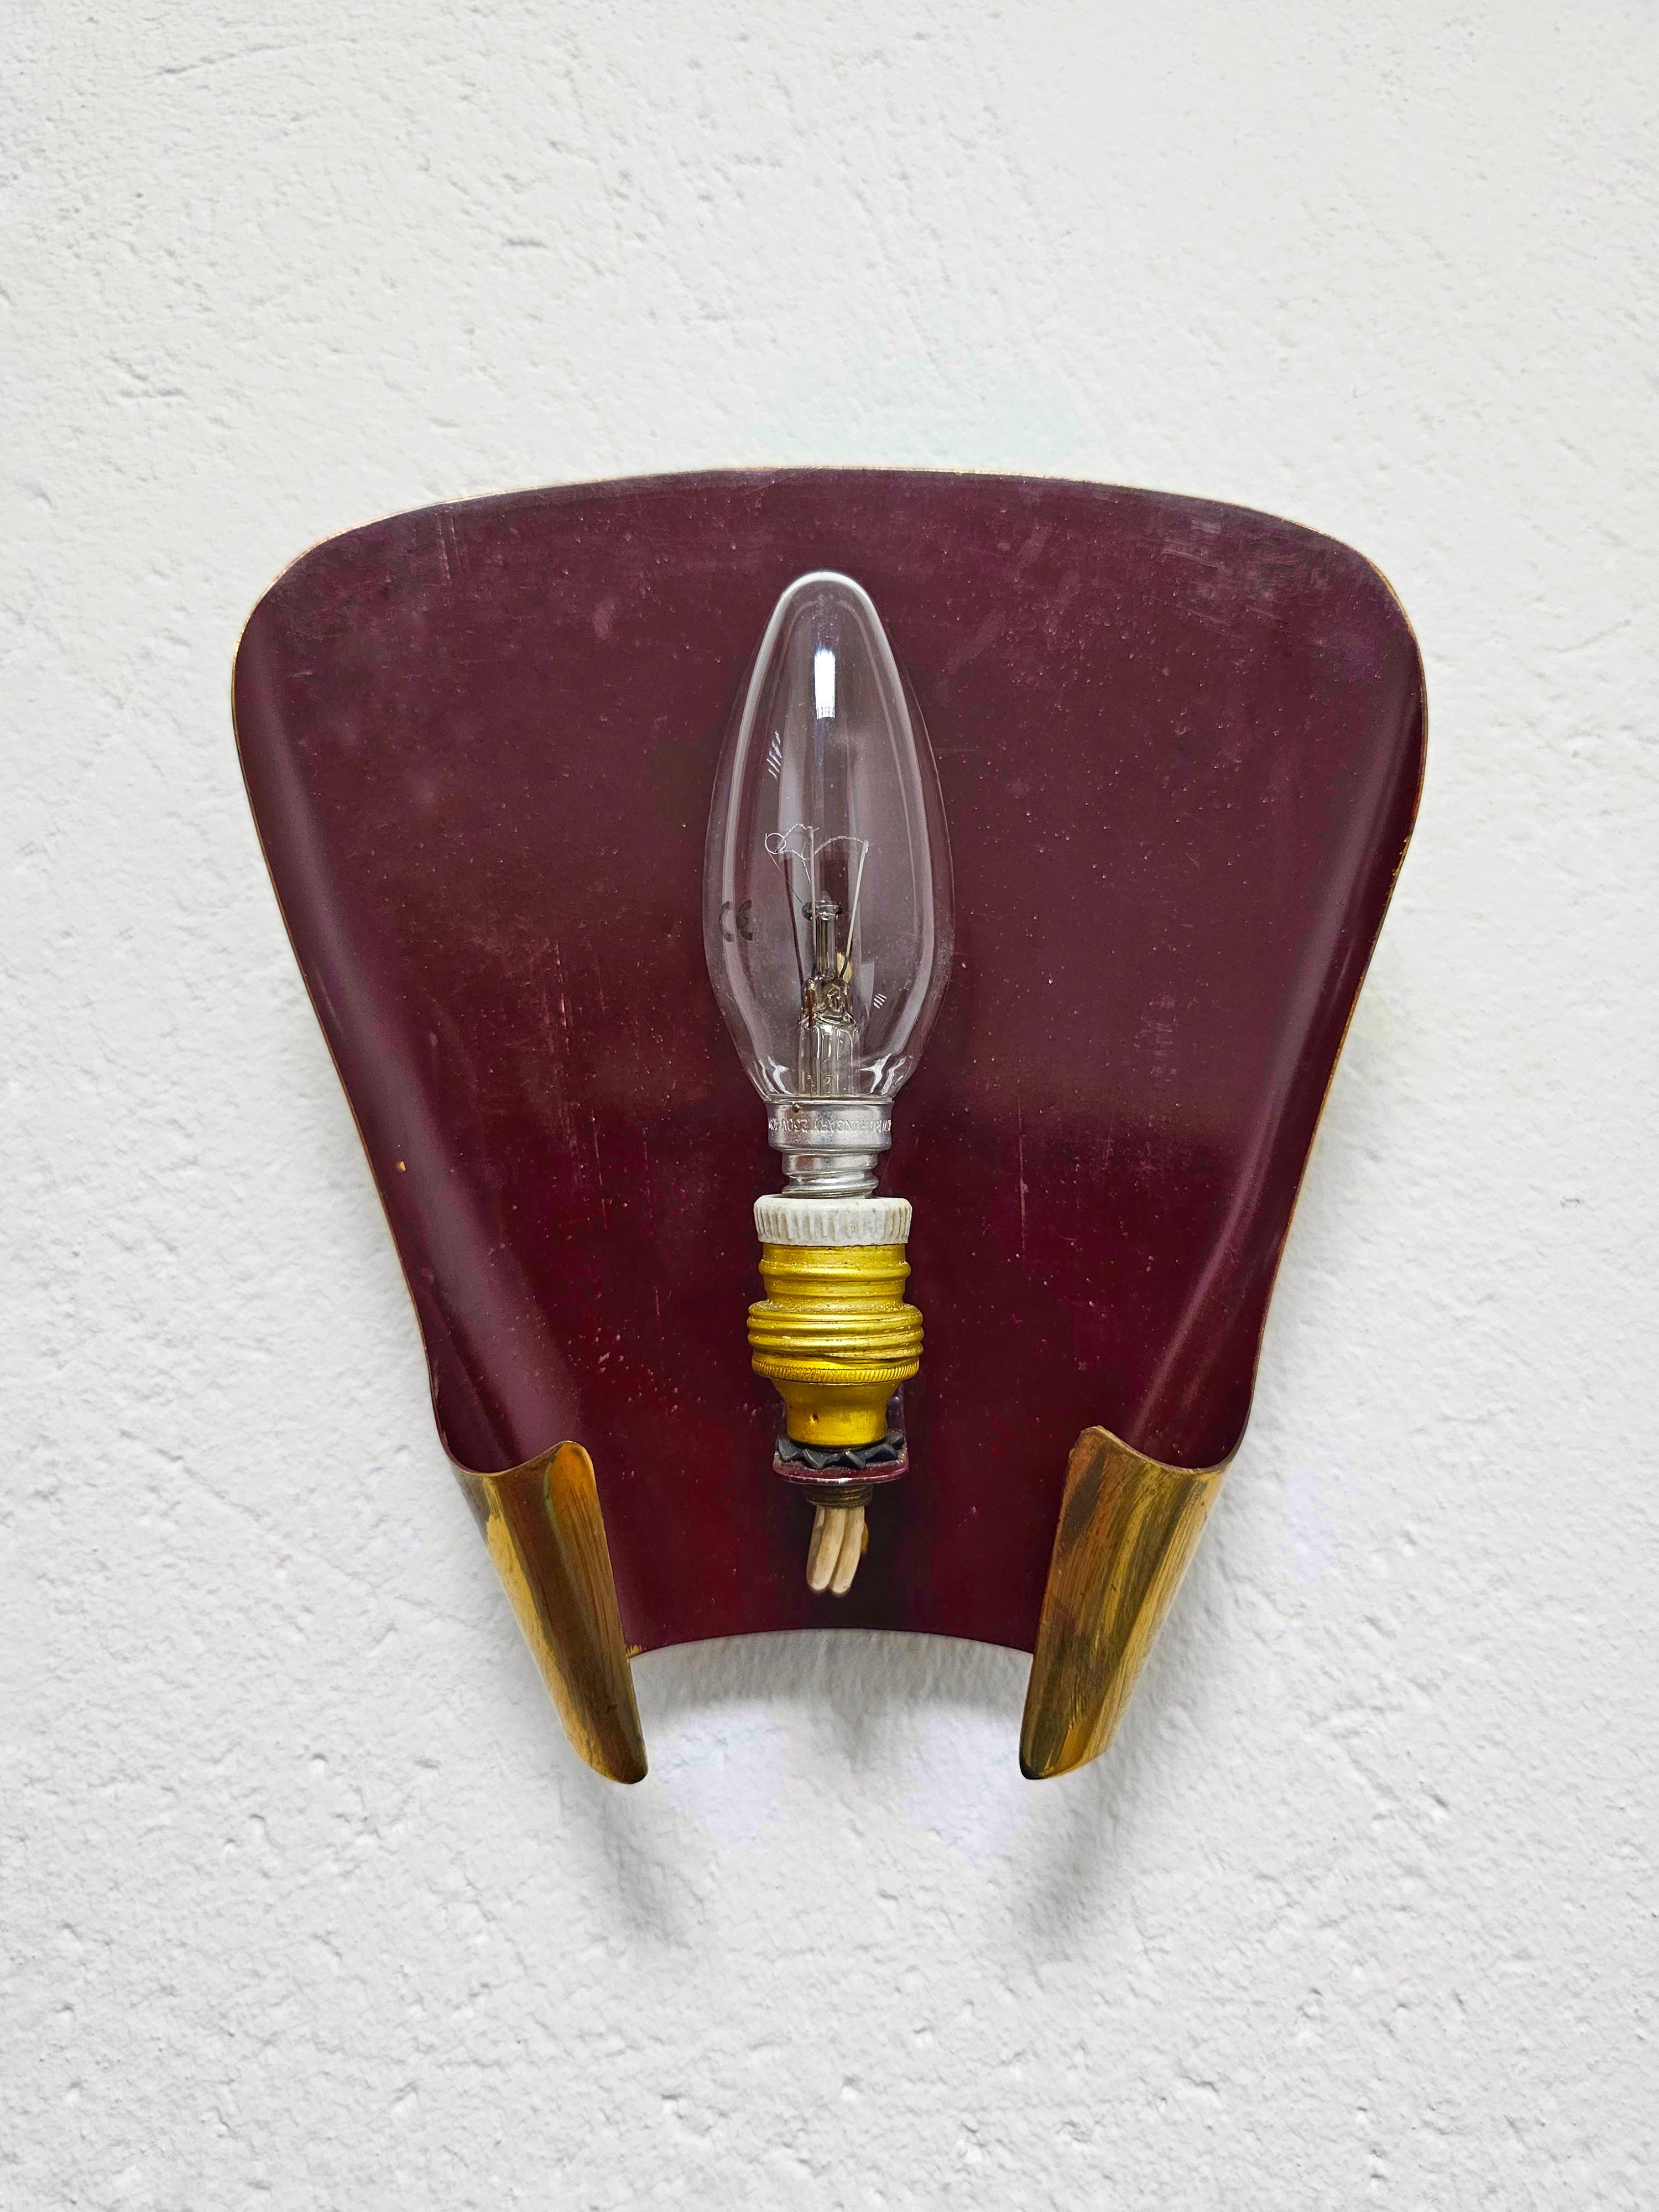 Pair of Mid Cnetury Modern Brass Sconces attr. to Stilnovo, Italy 1950s For Sale 3